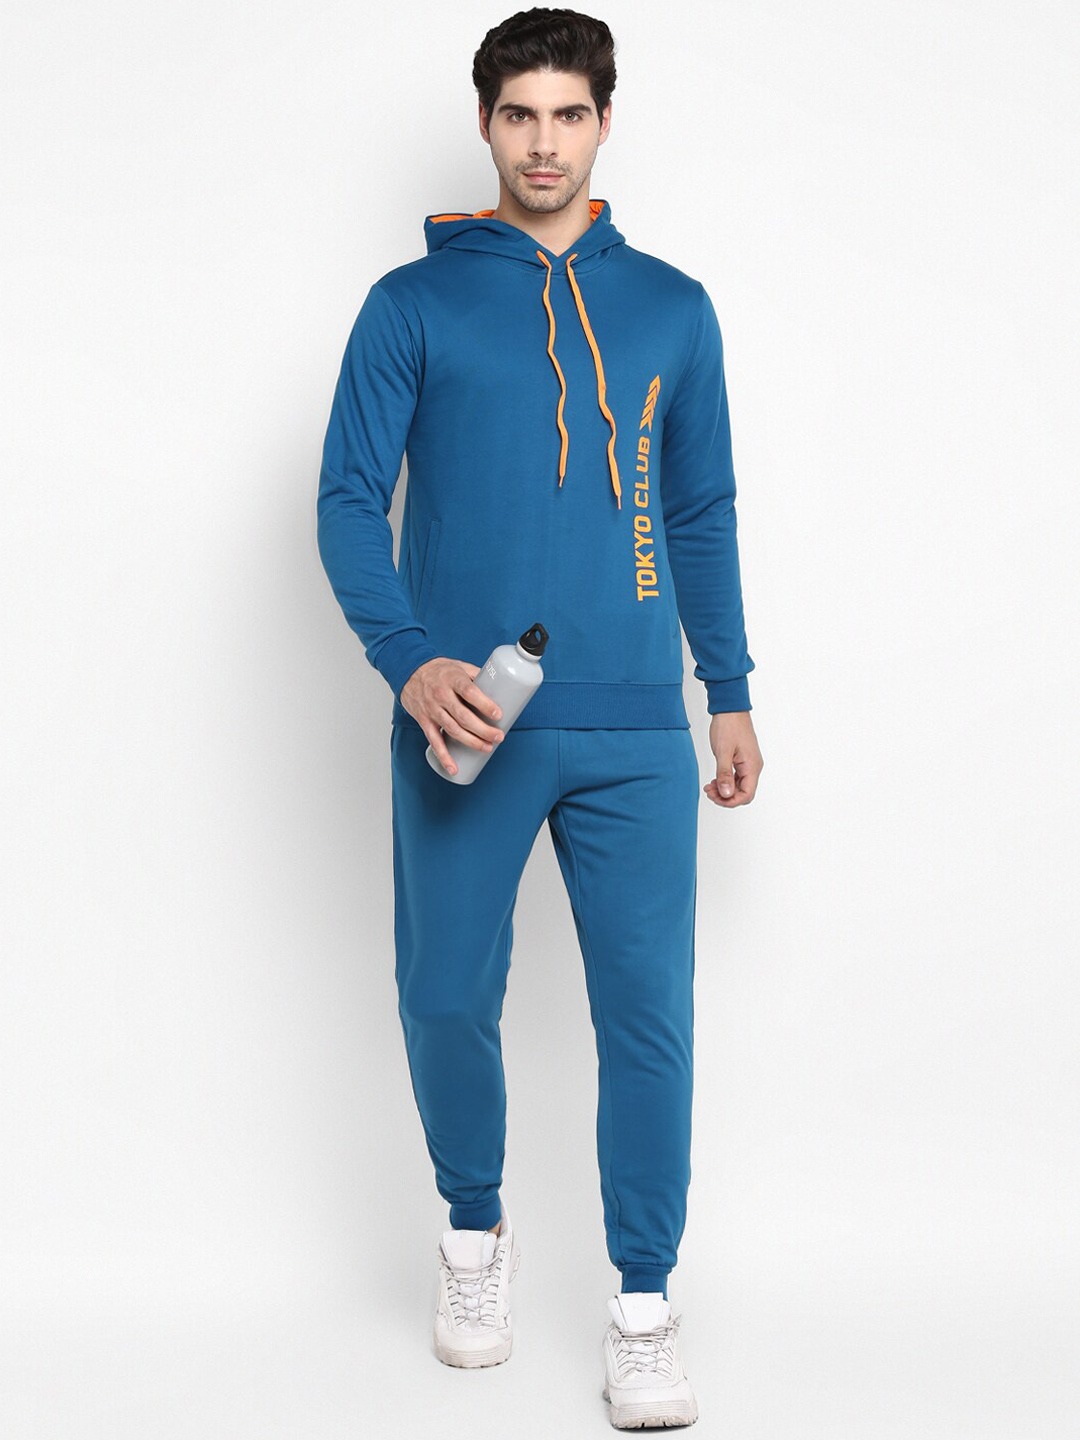 Clothing Tracksuits | OFF LIMITS Men Blue & Orange Printed Hooded Tracksuits - PJ51662